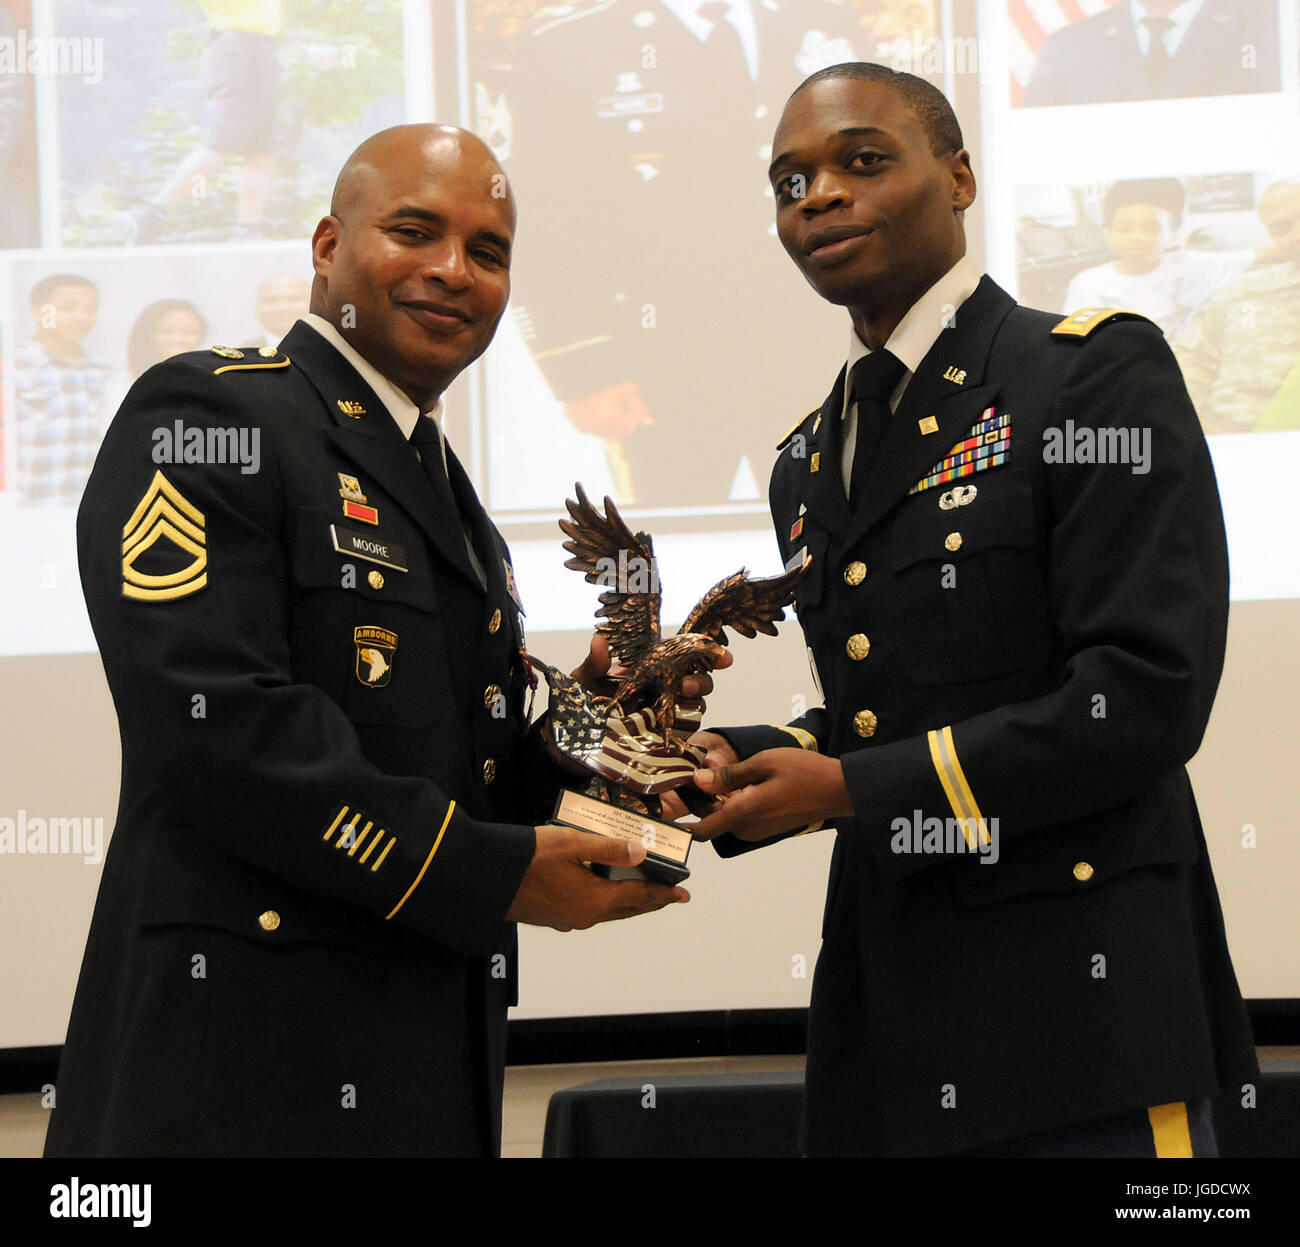 Capt. Eric Moton (right), chief, Finance Division for the U.S. Army Reserve’s 99th Regional Support Command, hands an award to Sgt. 1st Class Christopher Moore Nov. 5, 2016 during a retirement ceremony for Moore.  Moton earned his Ph.D. in business administration in 2016, joining a select group of Army Reserve Soldiers who have pursued higher education. Of all doctorates in the U.S. Army, 75 percent reside in the U.S. Army Reserve. Of all master’s degrees in the U.S. Army, 50 percent reside in the U.S. Army Reserve. Having such a highly educated force helps America’s Army Reserve remain the mo Stock Photo